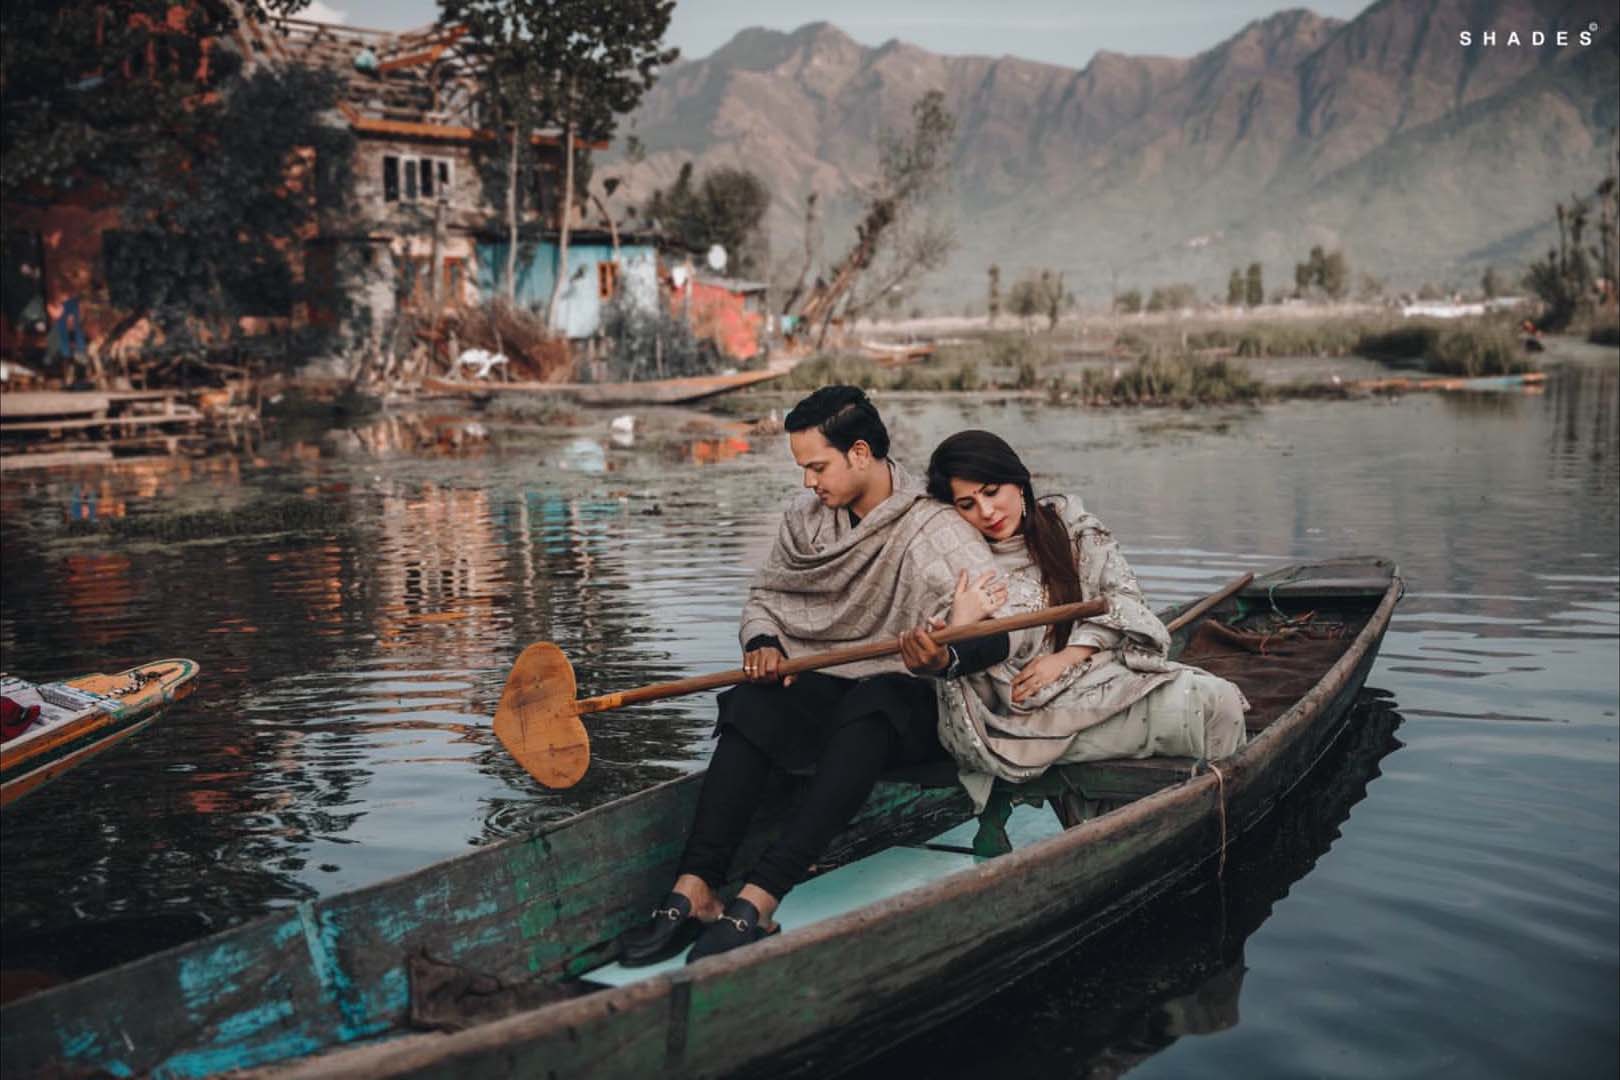 These Pre-Wedding Photos Shot in Kashmir Are Simply Beautiful